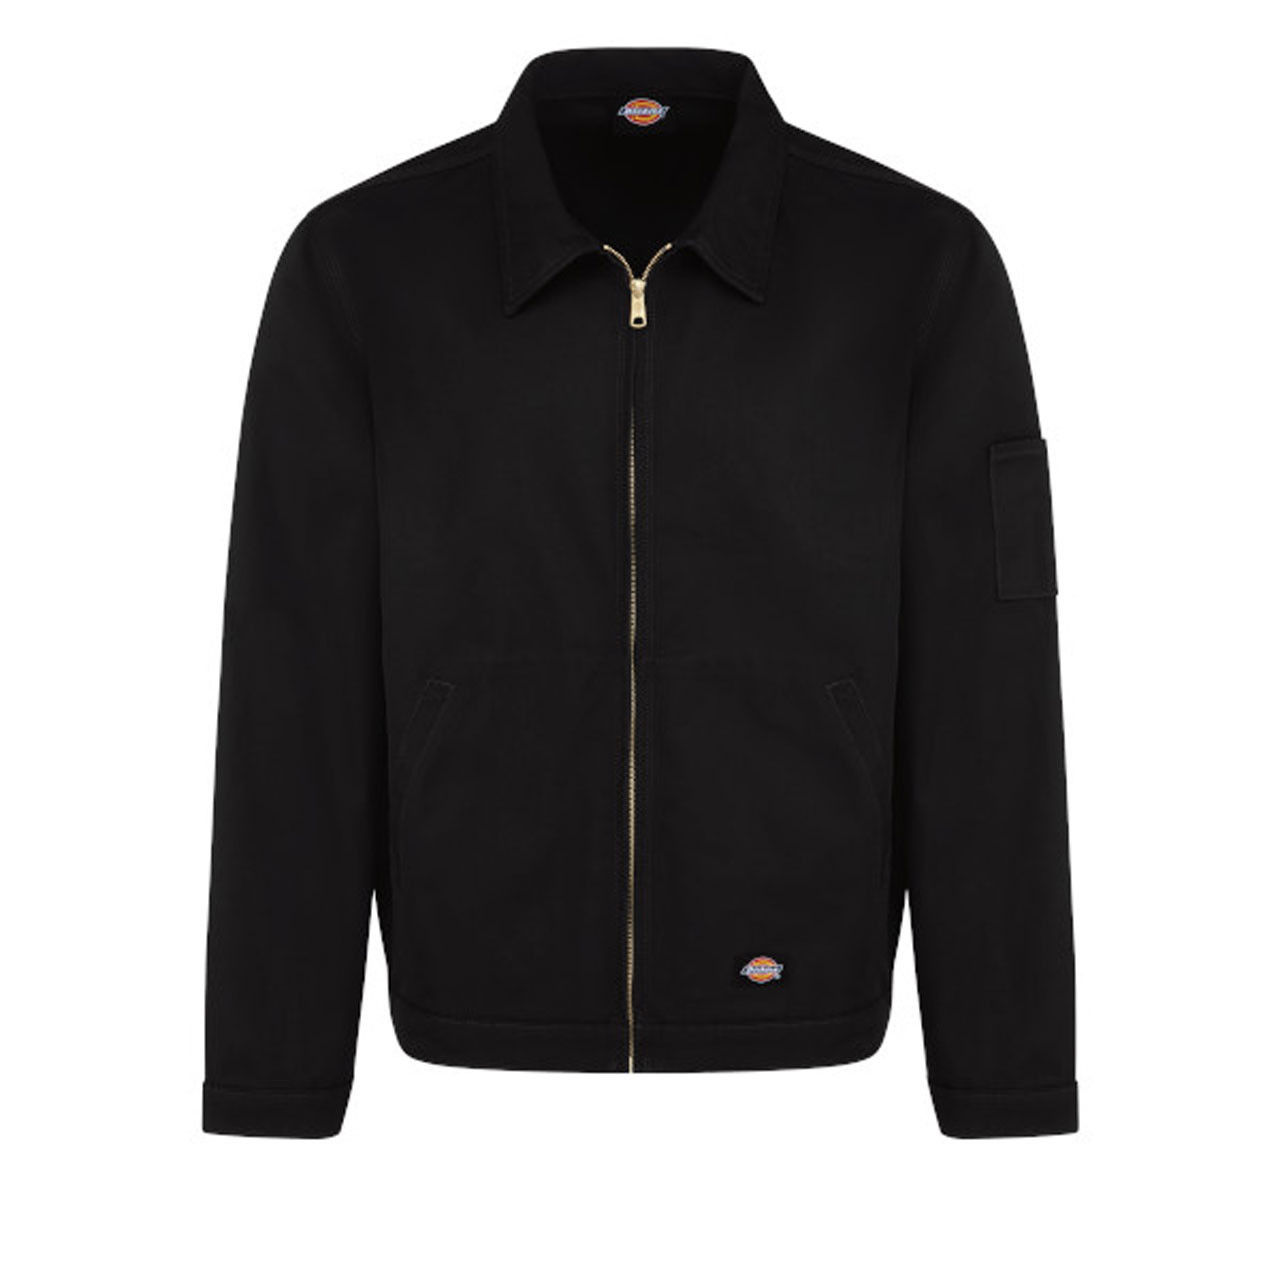 Where does the Dickies Unlined Industrial Eisenhower Jacket ship from?